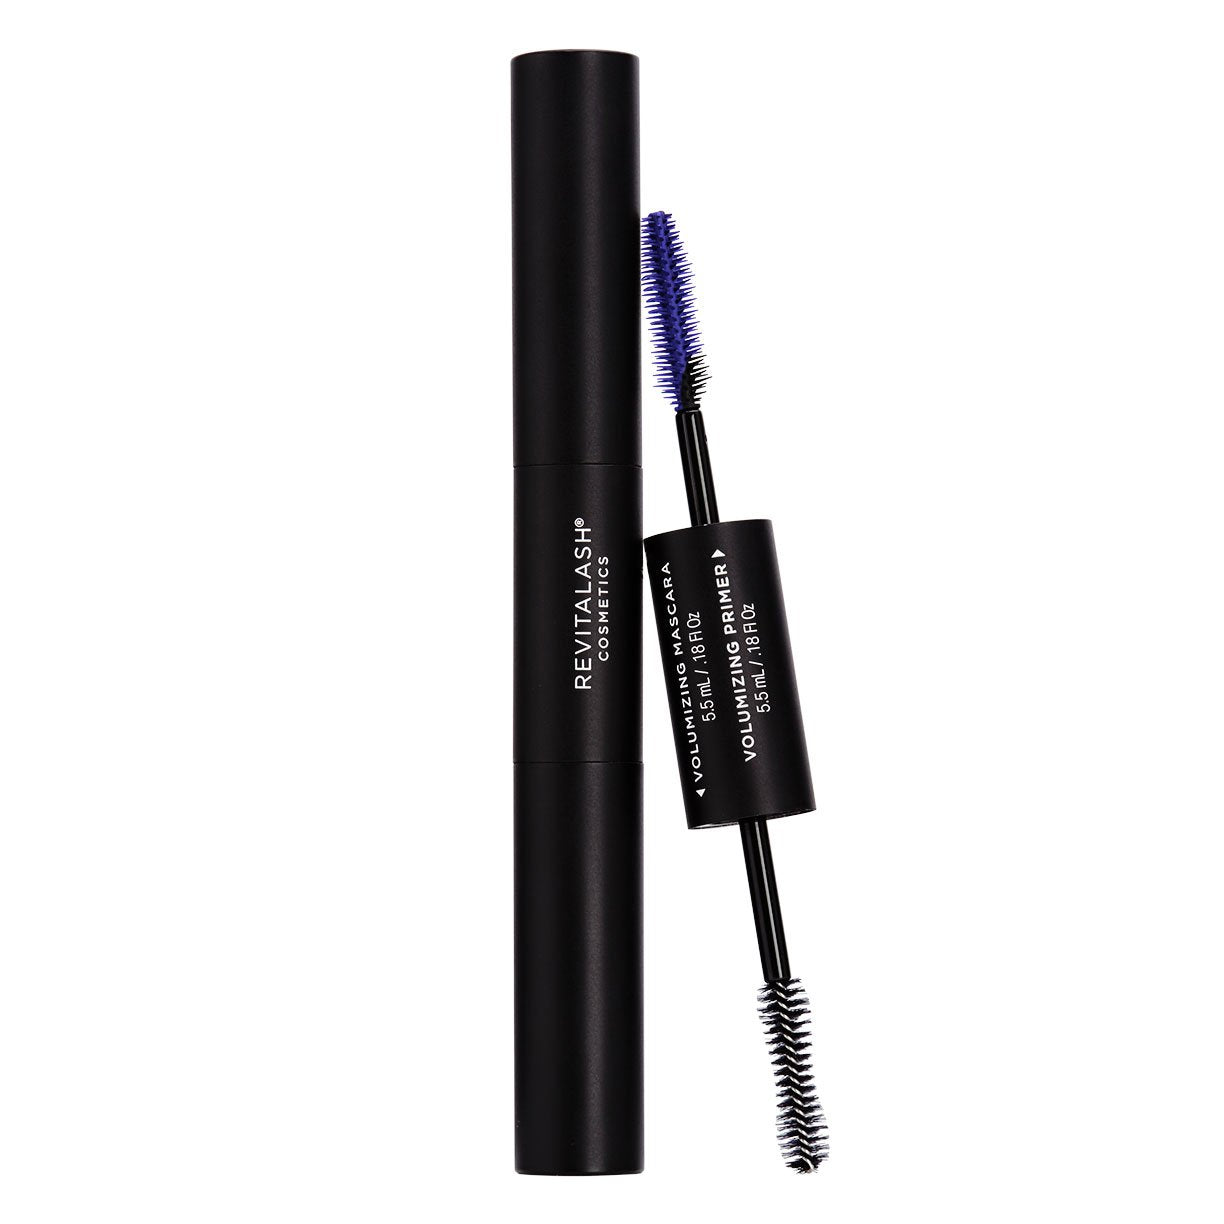 Double-Ended Volume Set: Elevate Your Lashes with Award-Winning Primer and Mascara Combo